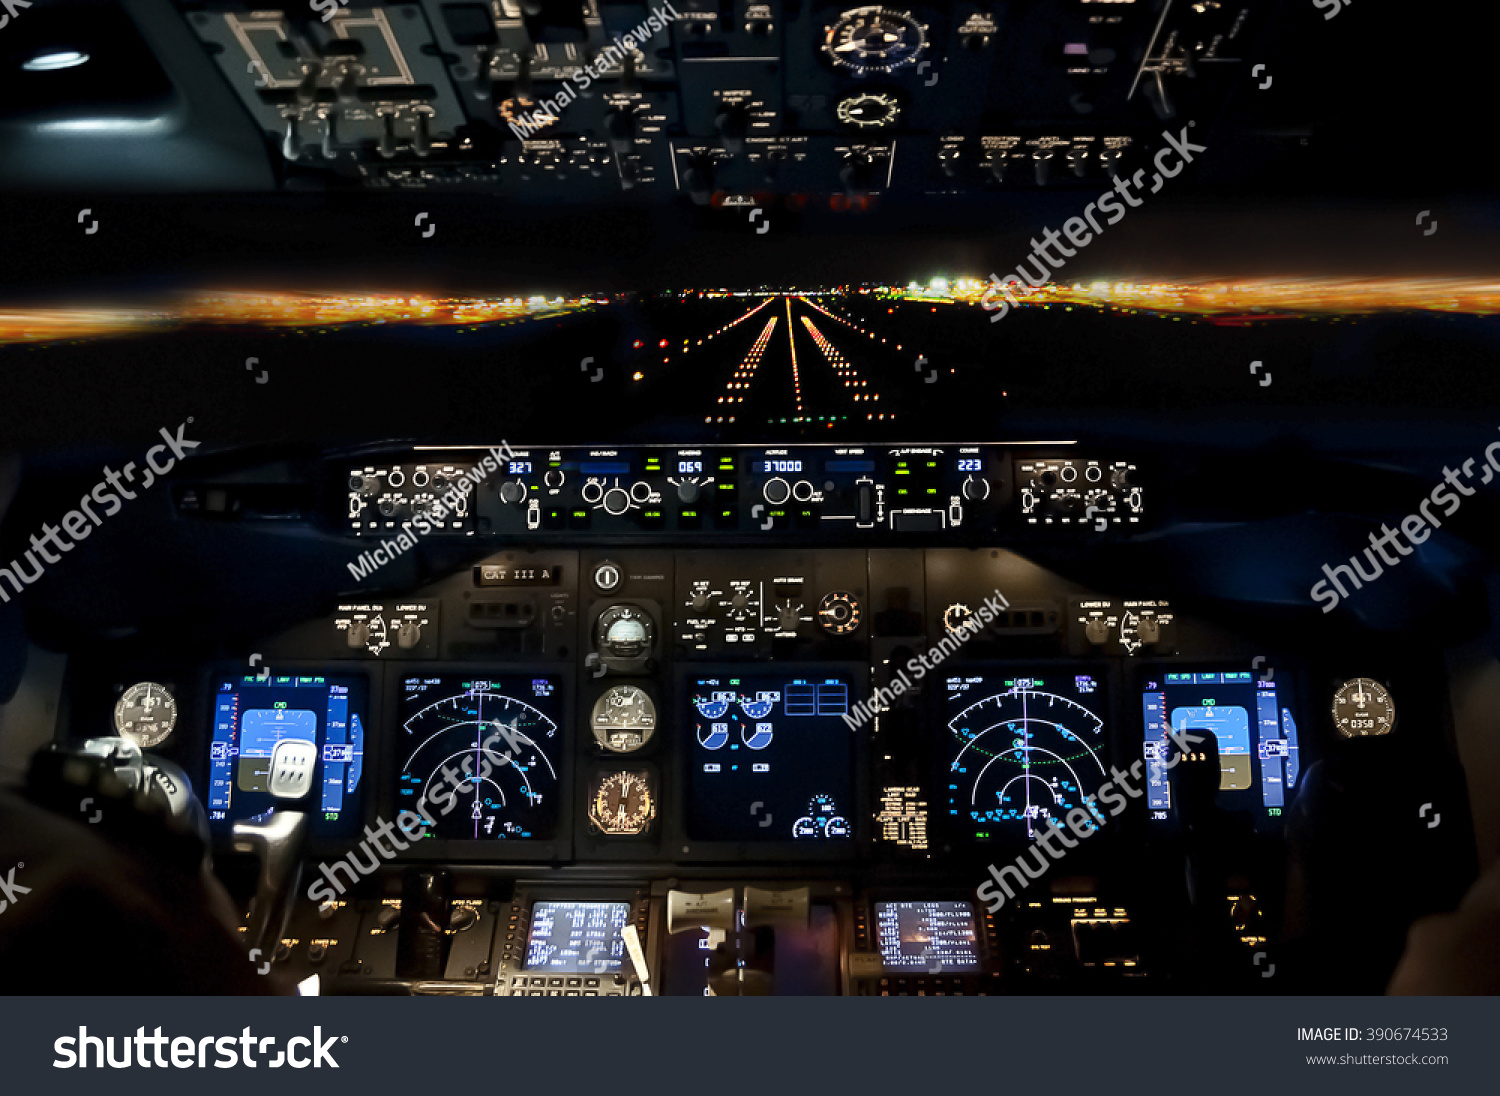 Final approach at night - landing of a jet airliner, view from the cockpit #390674533